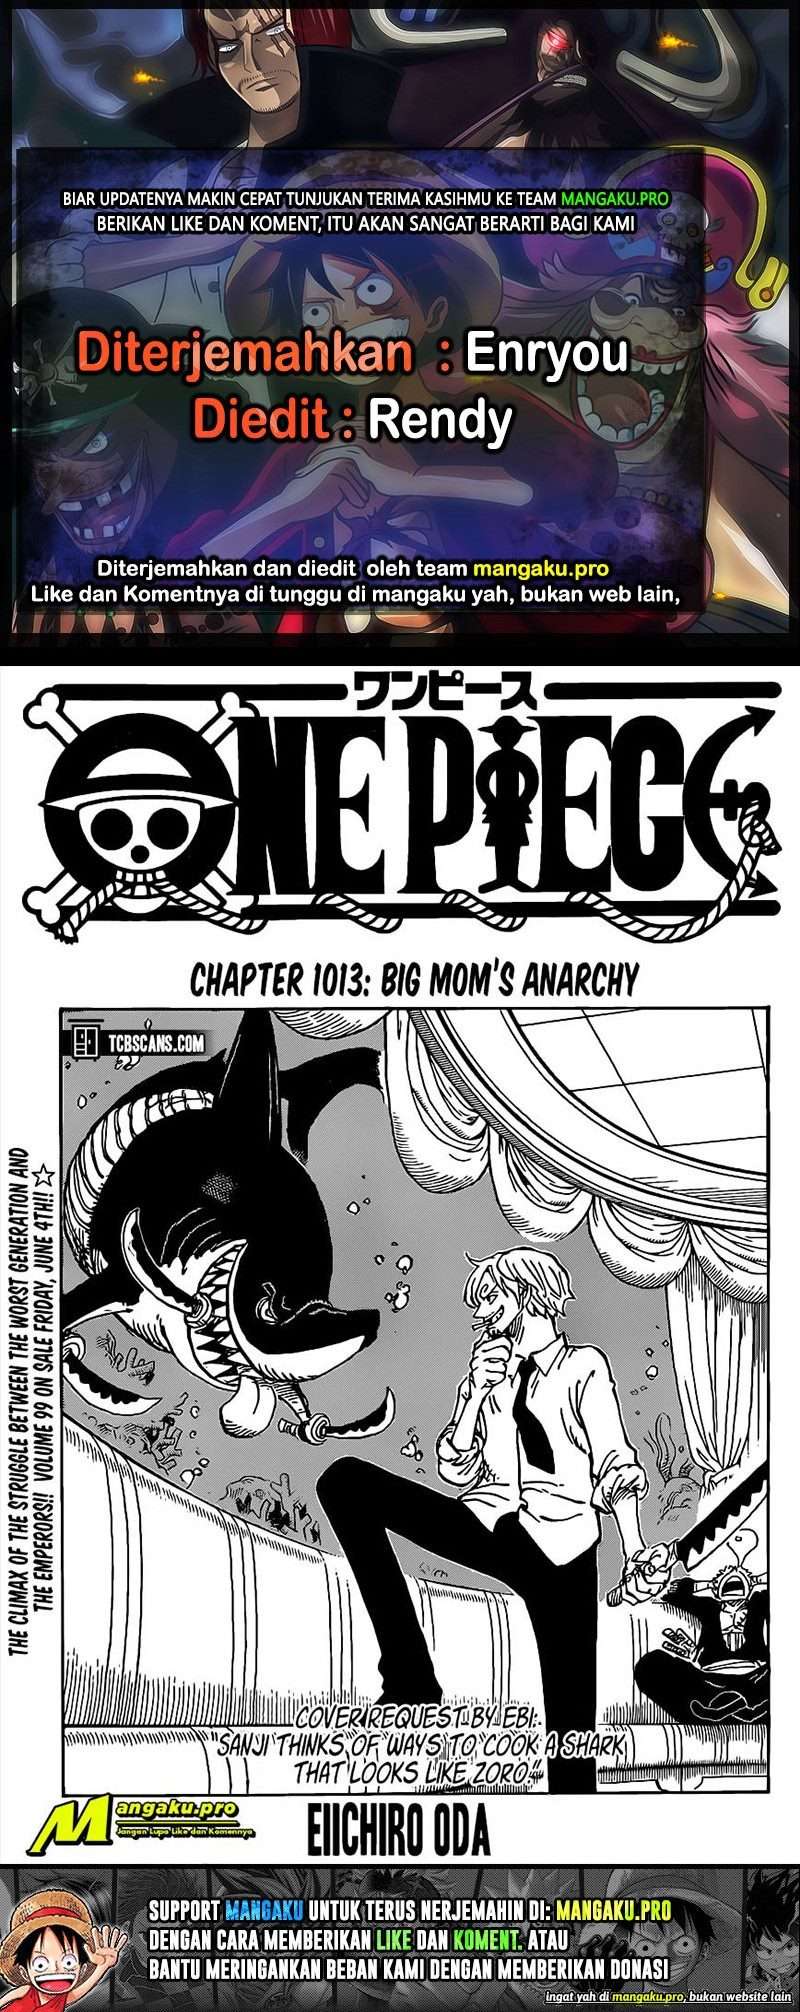 One Piece Chapter 1013 Hq - 49